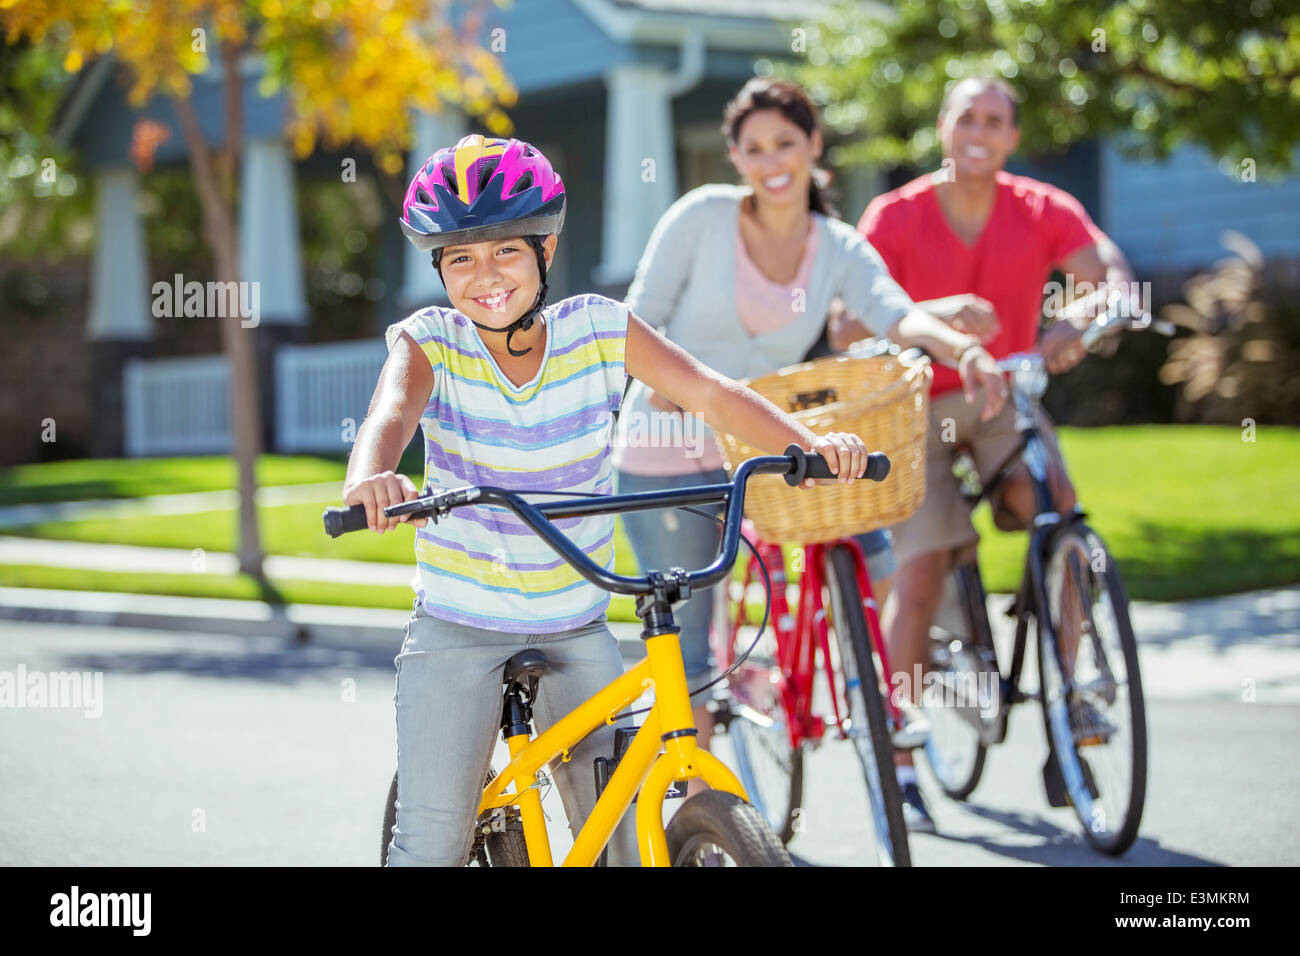 Portrait of smiling family riding bikes in street Banque D'Images